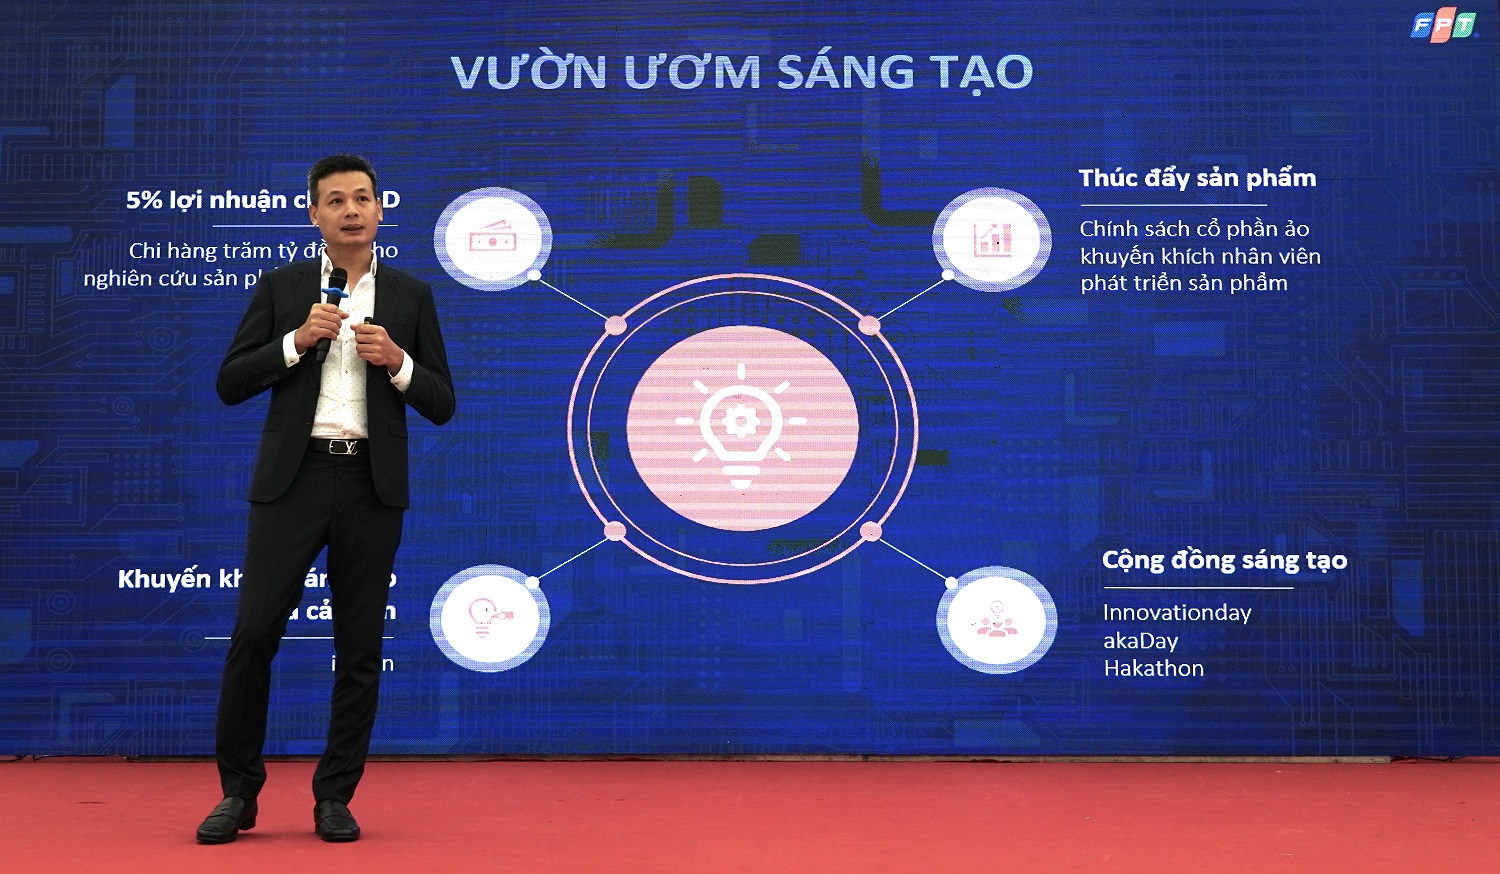 Mr. Vu Anh Tu - FPT CTO - shared about FPT's Innovation Incubator for internal startups.